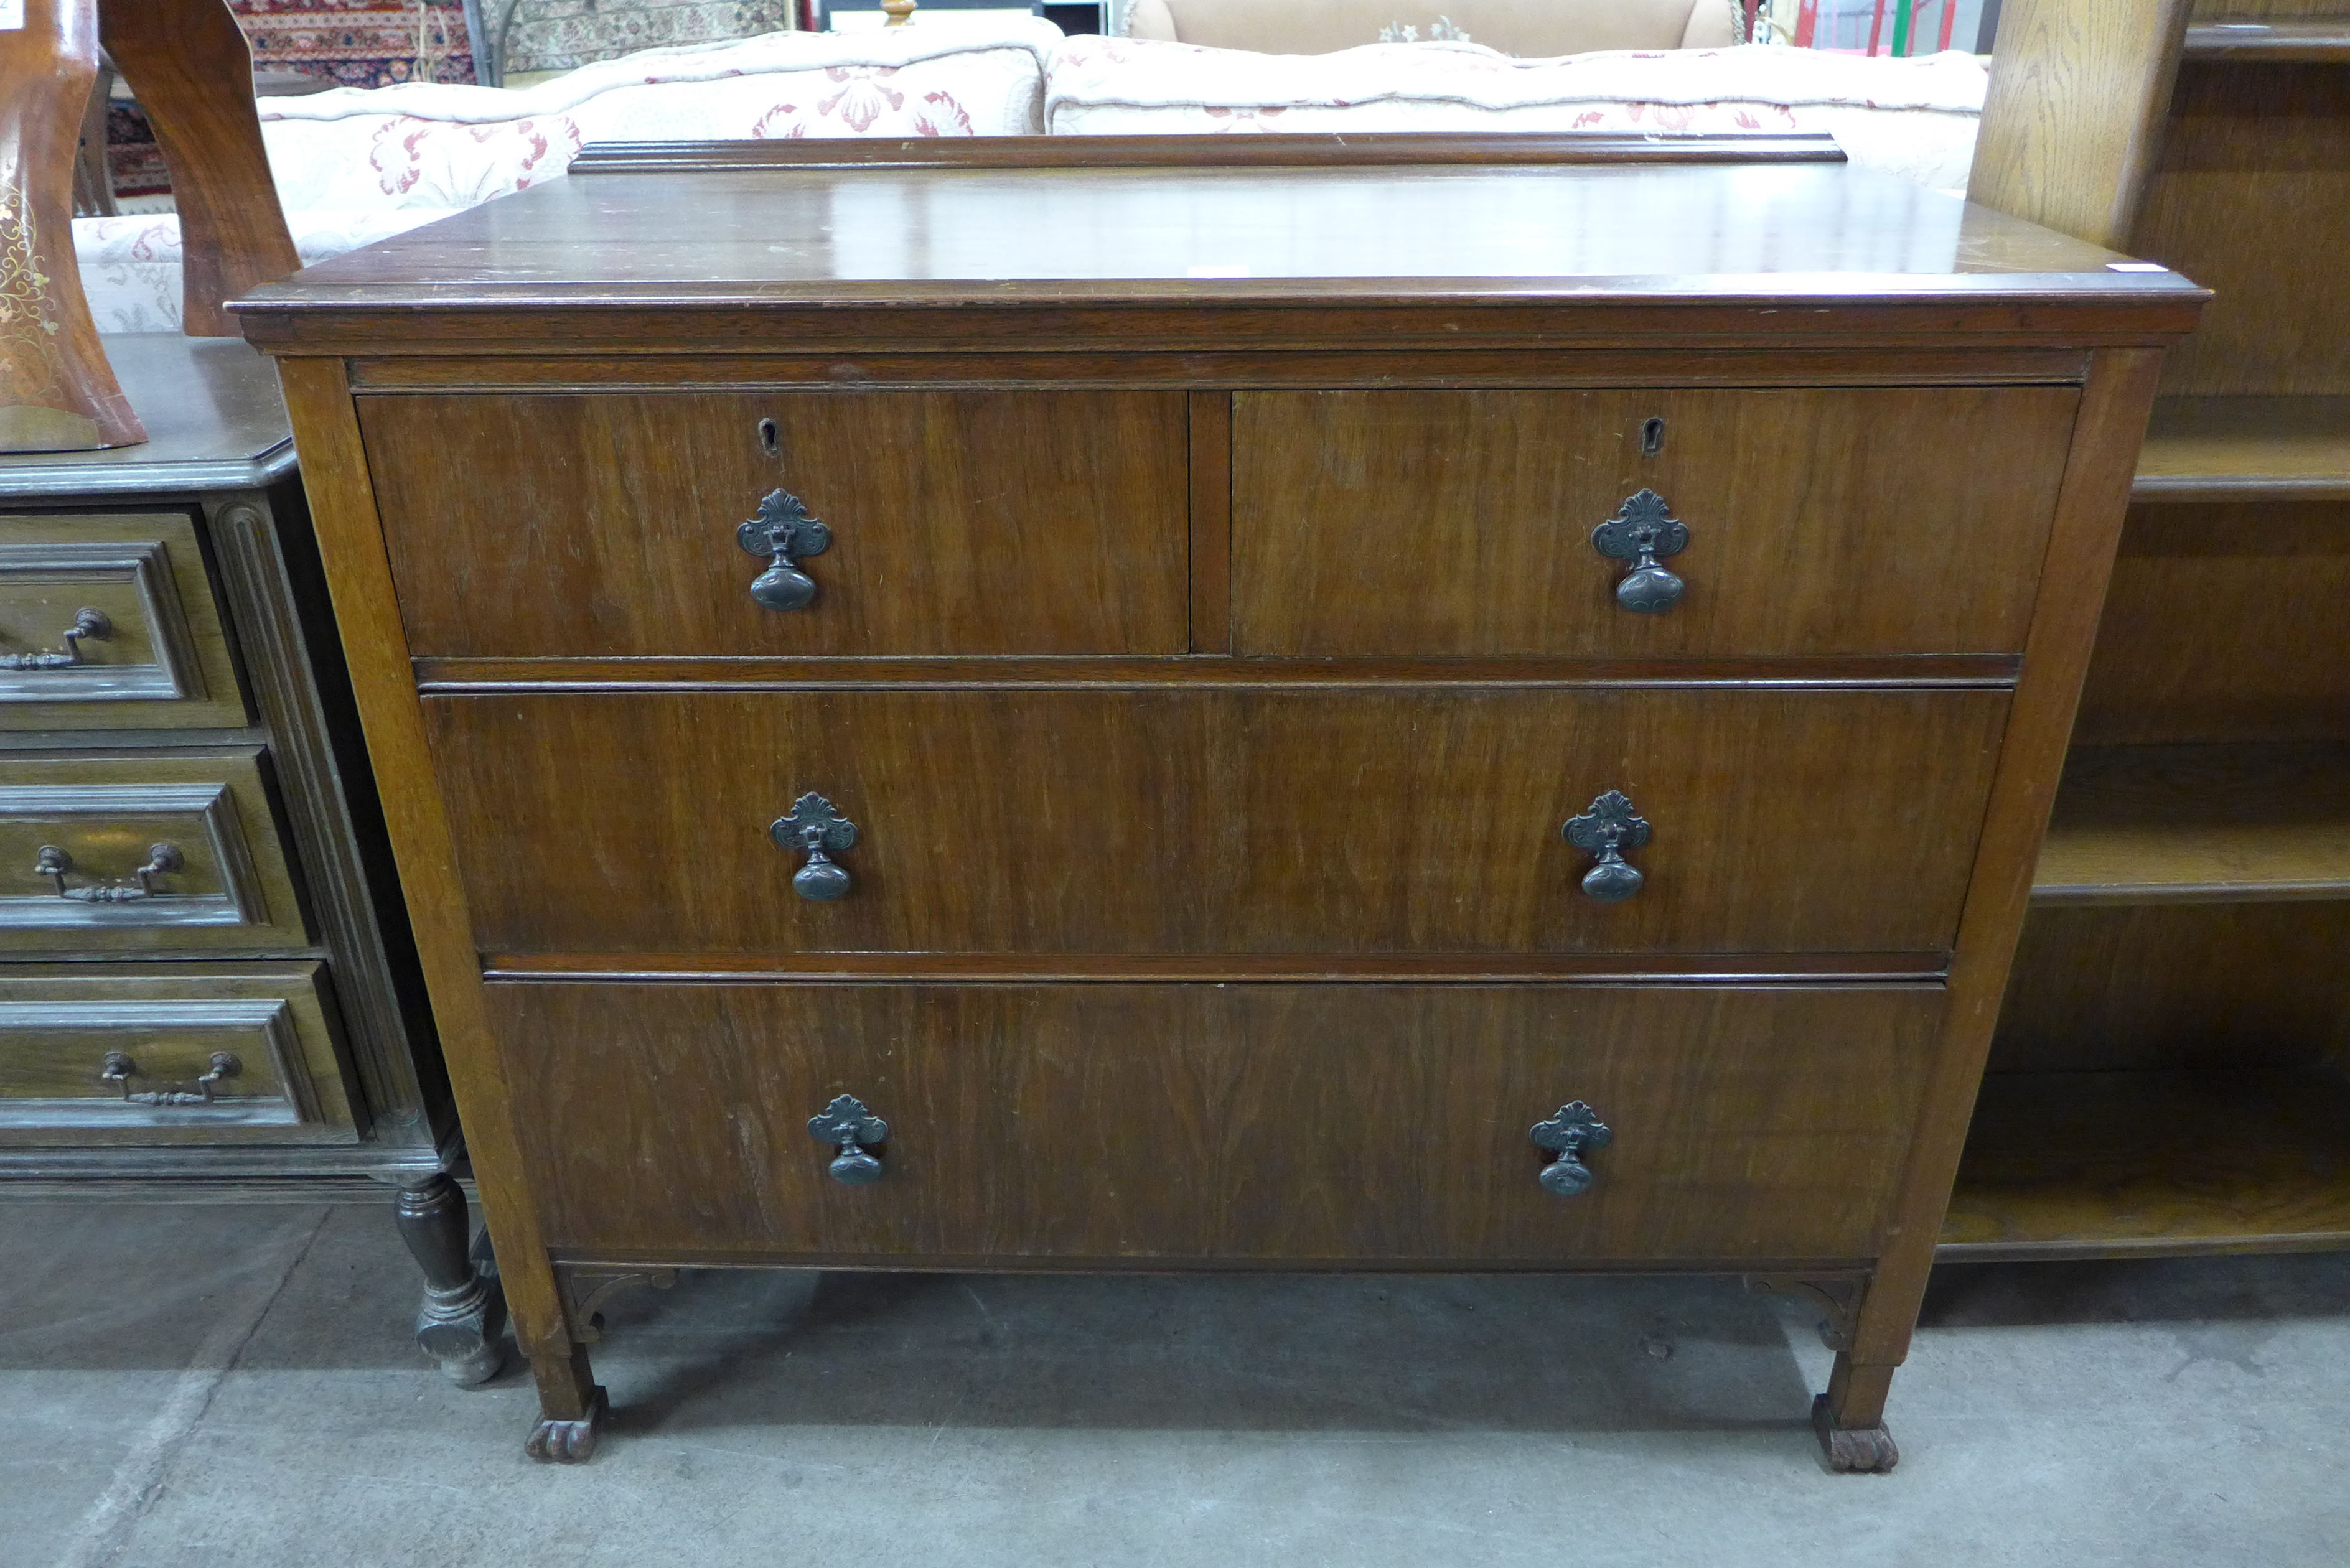 A 1930's walnut chest of drawers